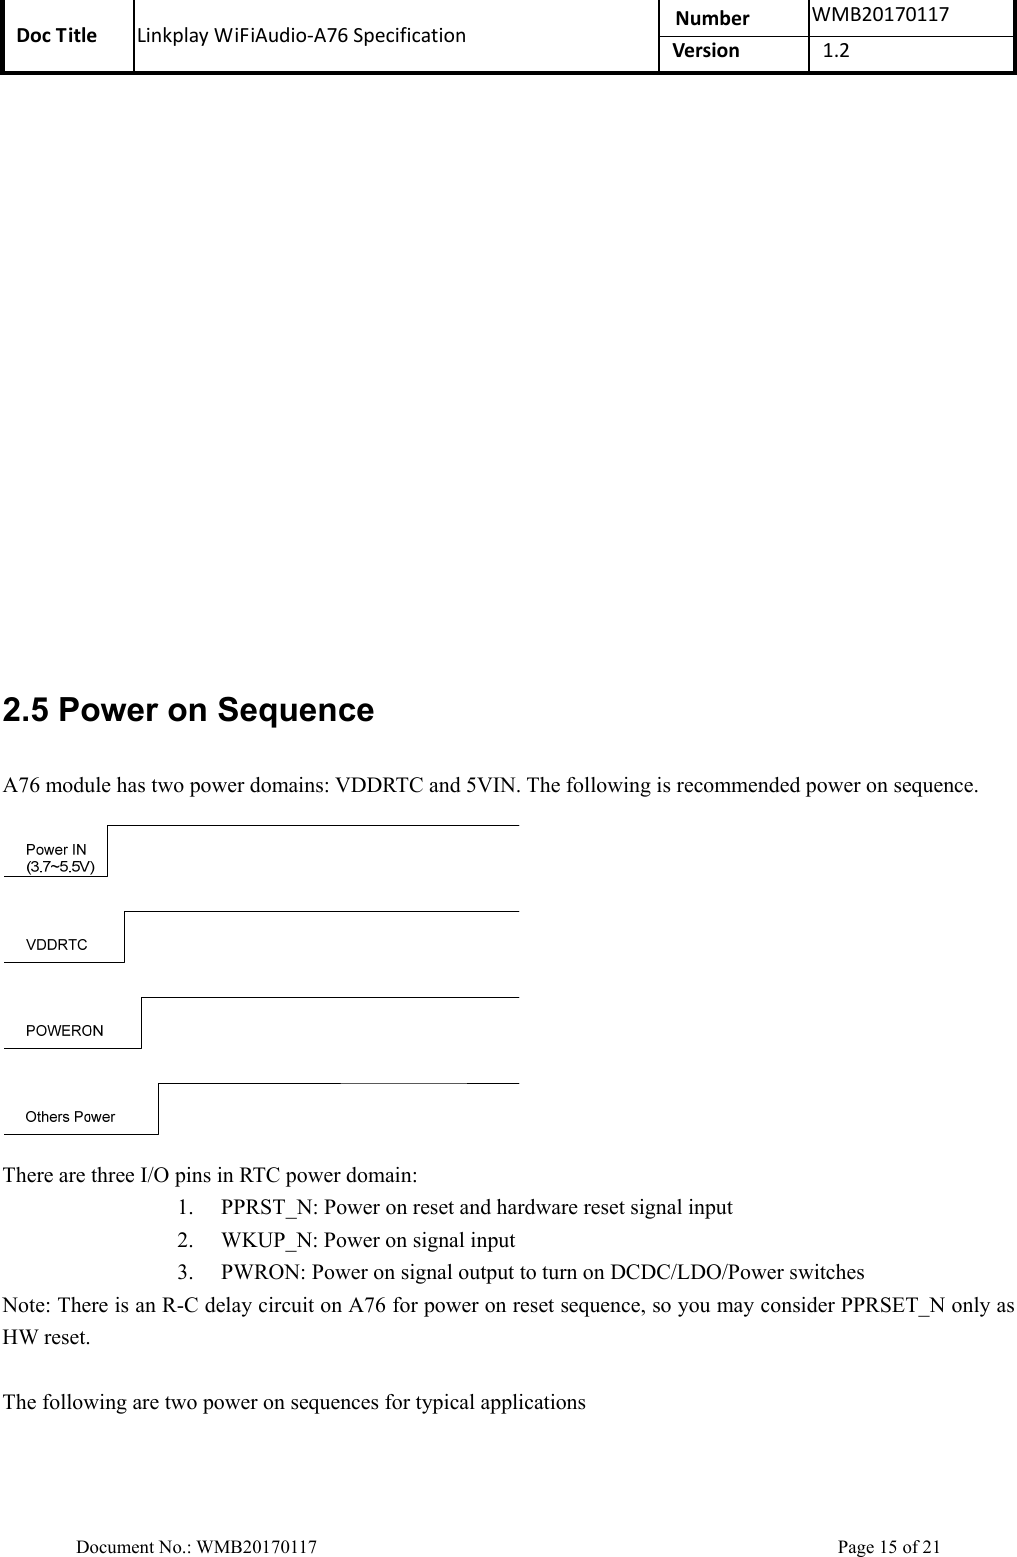 Doc Title  Linkplay WiFiAudio-A76 Specification  Number  WMB20170117Version  1.2  Document No.: WMB20170117    Page 15 of 21  2.5 Power on Sequence A76 module has two power domains: VDDRTC and 5VIN. The following is recommended power on sequence.  There are three I/O pins in RTC power domain: 1. PPRST_N: Power on reset and hardware reset signal input   2. WKUP_N: Power on signal input 3. PWRON: Power on signal output to turn on DCDC/LDO/Power switches Note: There is an R-C delay circuit on A76 for power on reset sequence, so you may consider PPRSET_N only as HW reset.    The following are two power on sequences for typical applications 